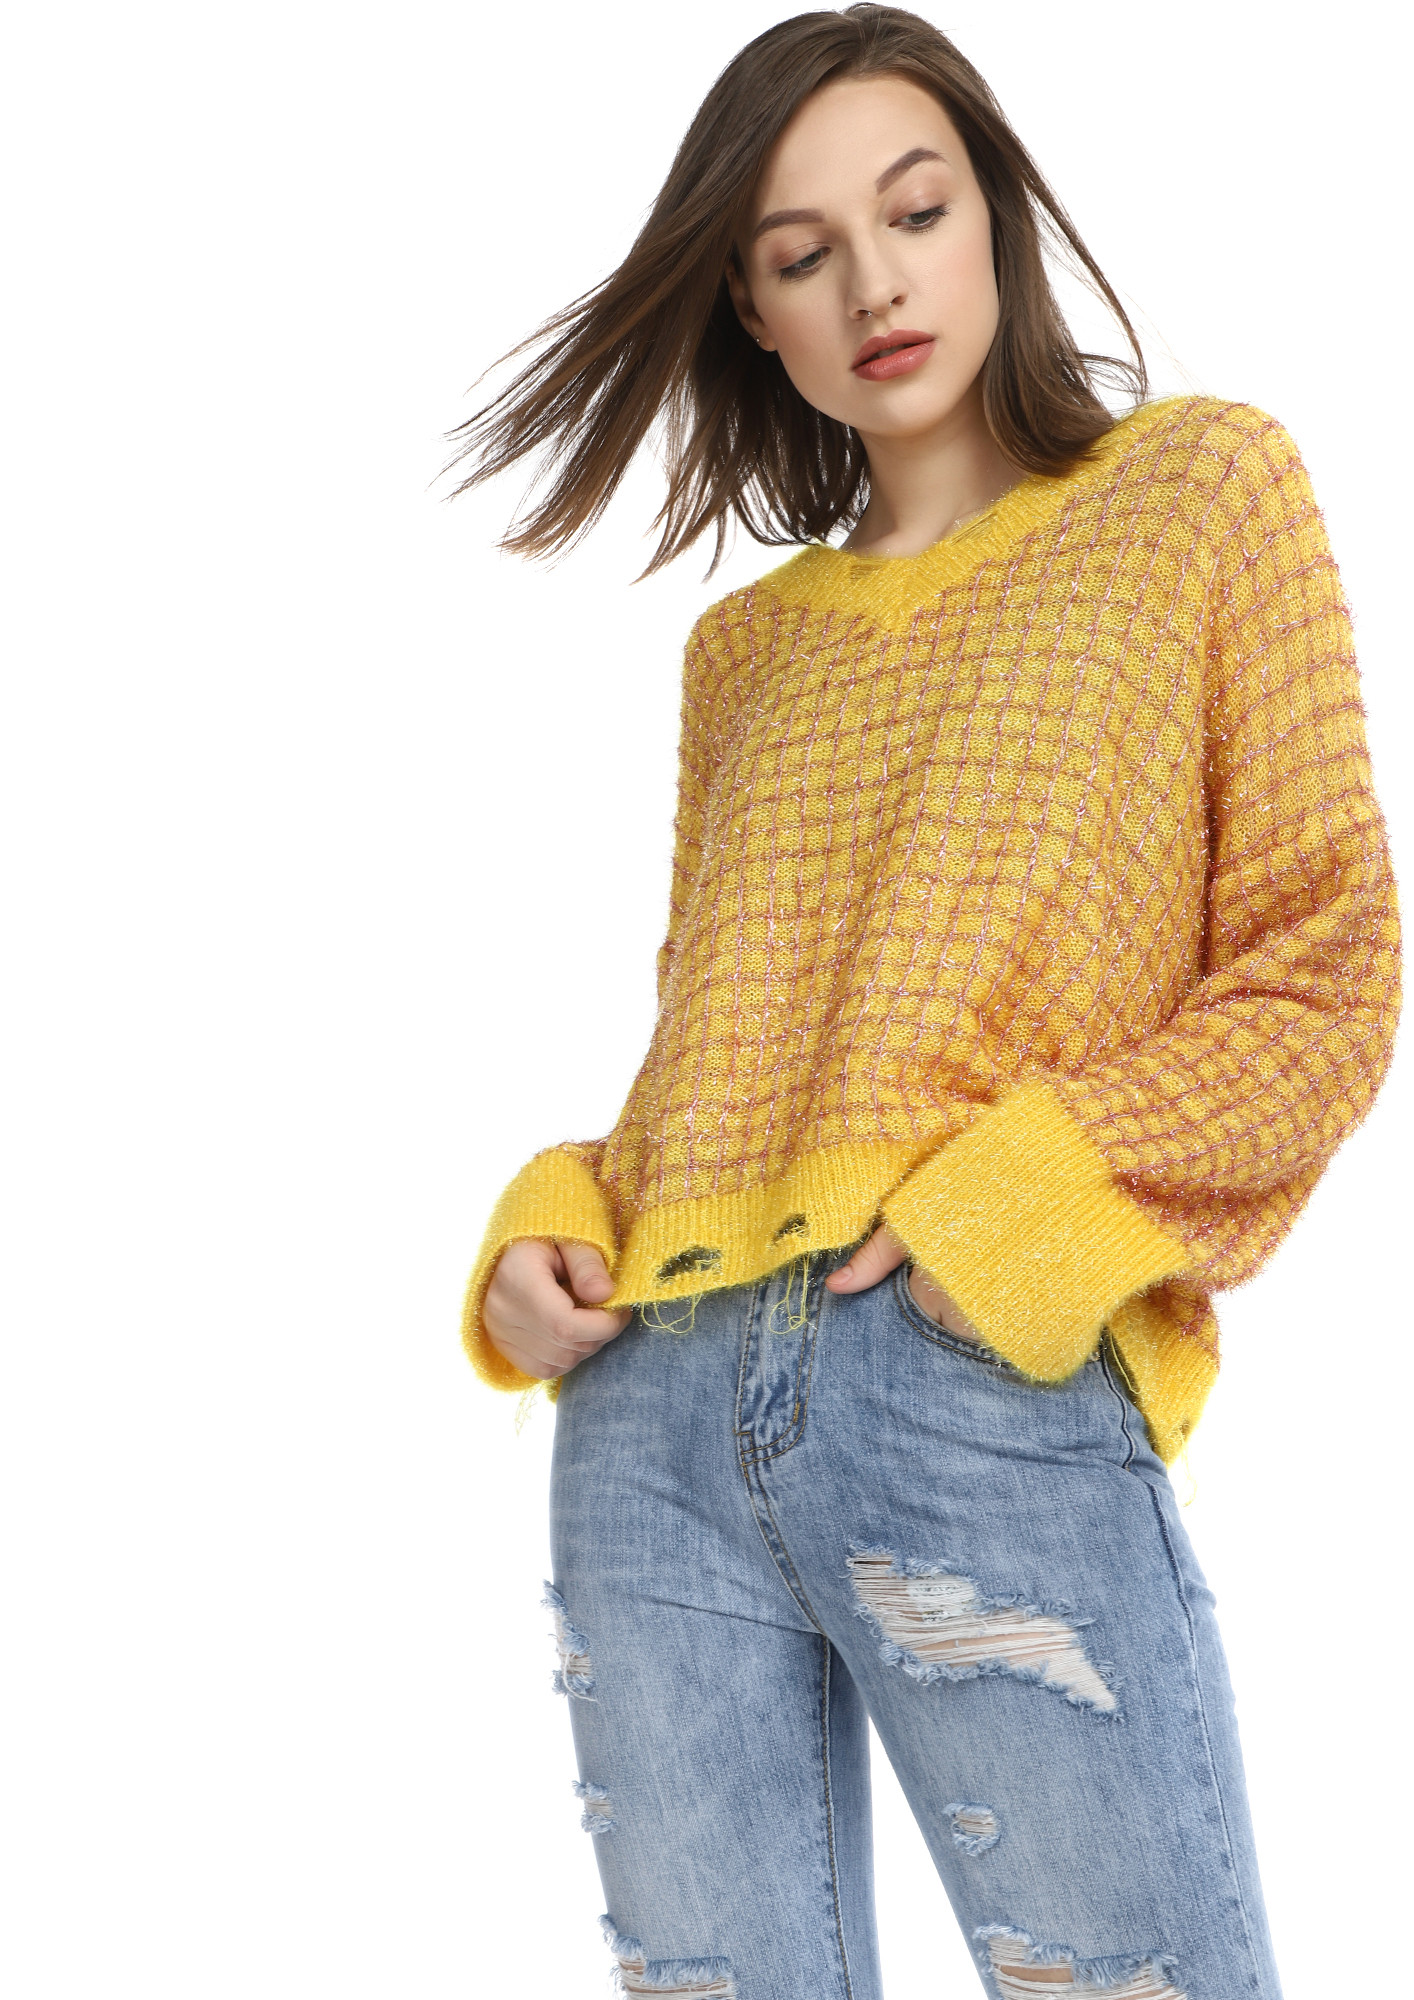 SQUARES BY SQUARES YELLOW JUMPER